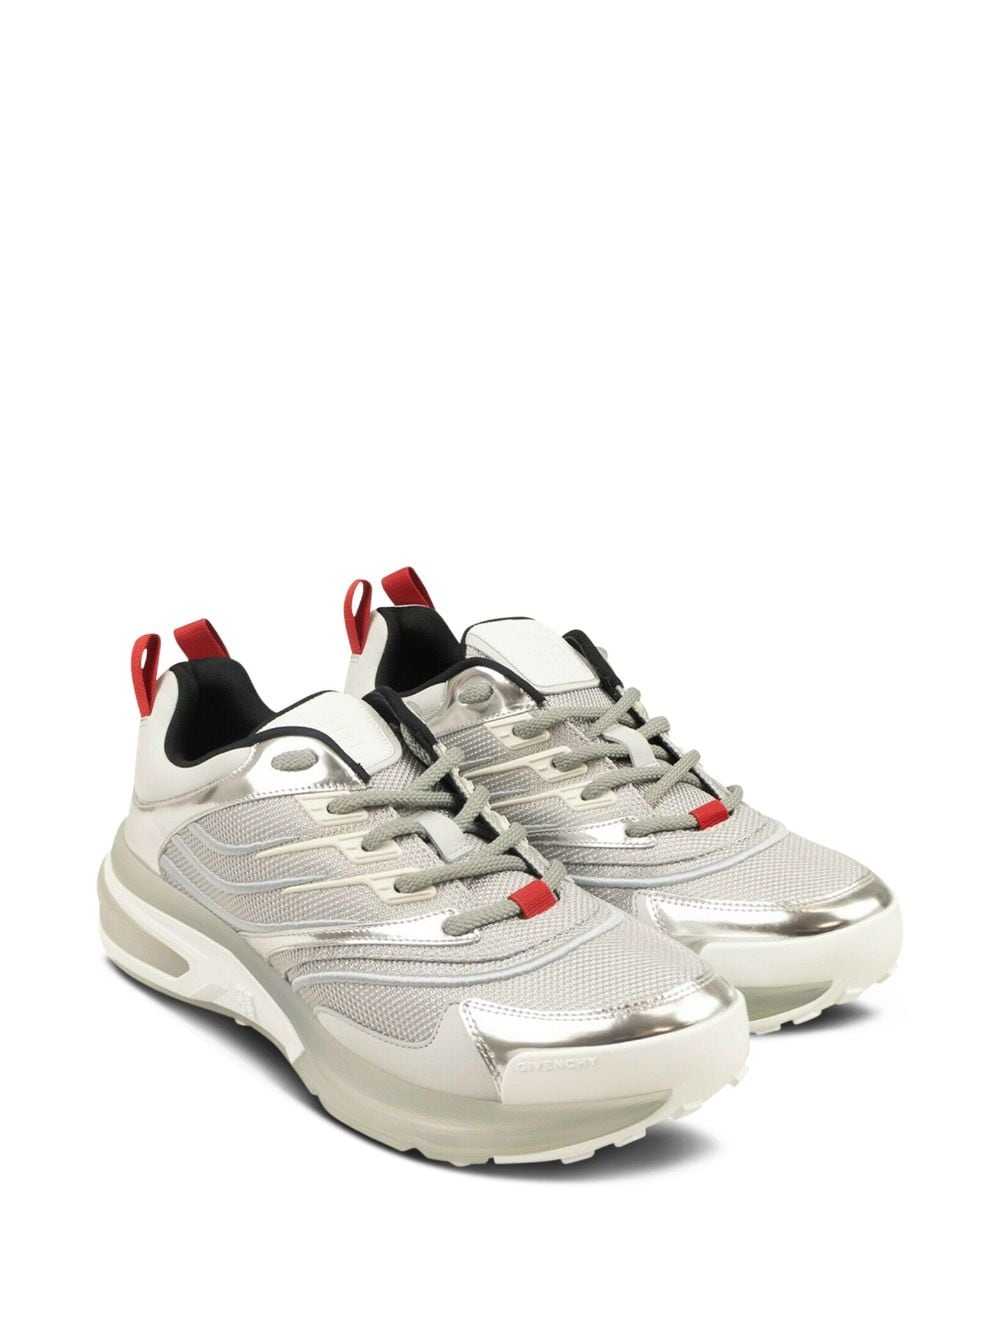 Image 2 of Givenchy Giv 1 "Silver" sneakers